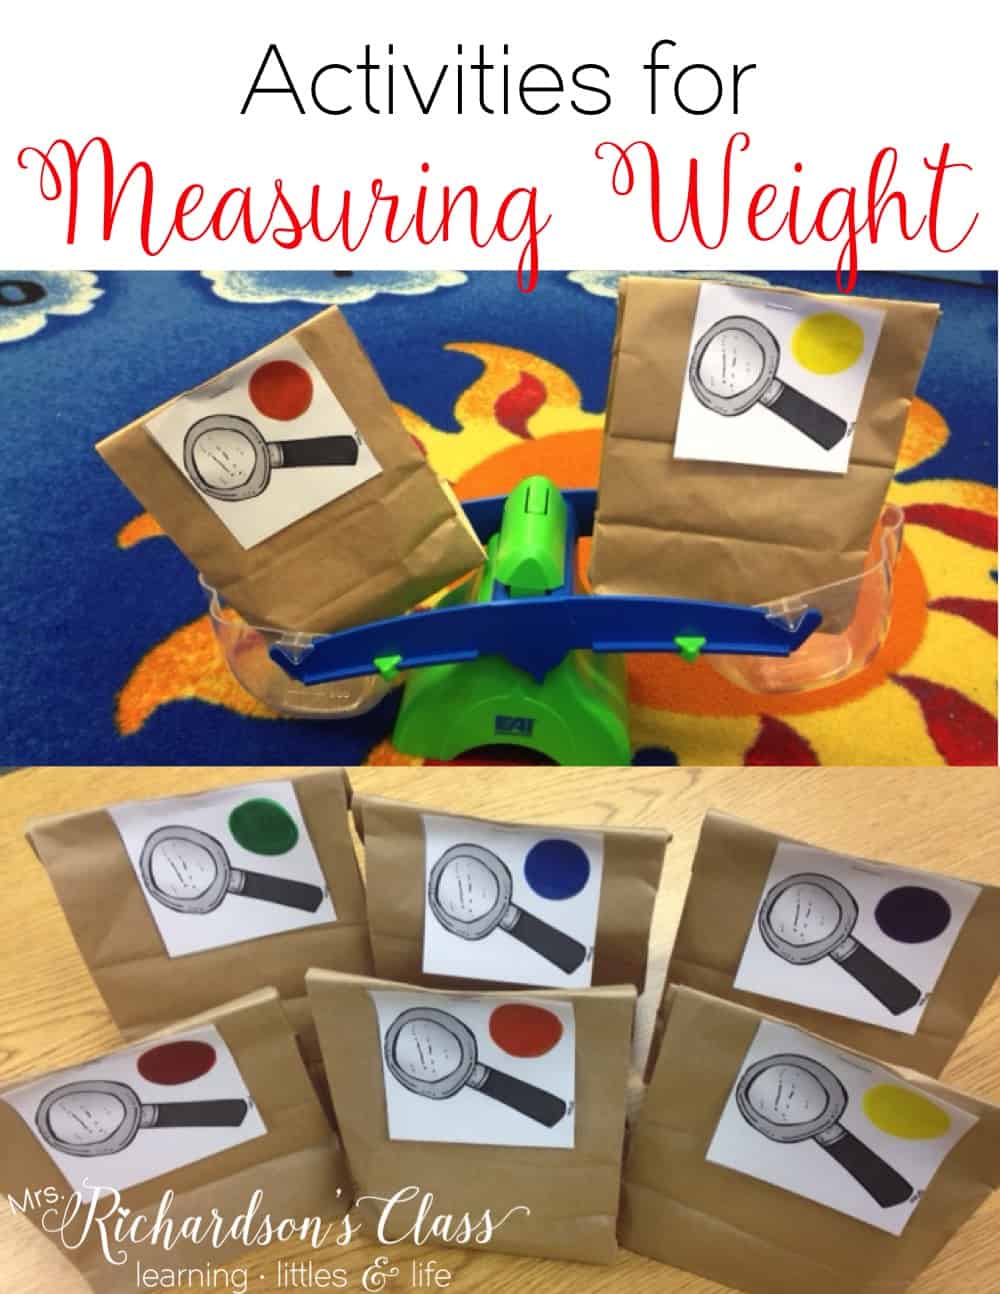 These measuring weight activities are sure to keep your kindergarten and first graders engaged! My students were GLUED to this lesson! It's a must-do for sure! #MathLessons #MathActivities